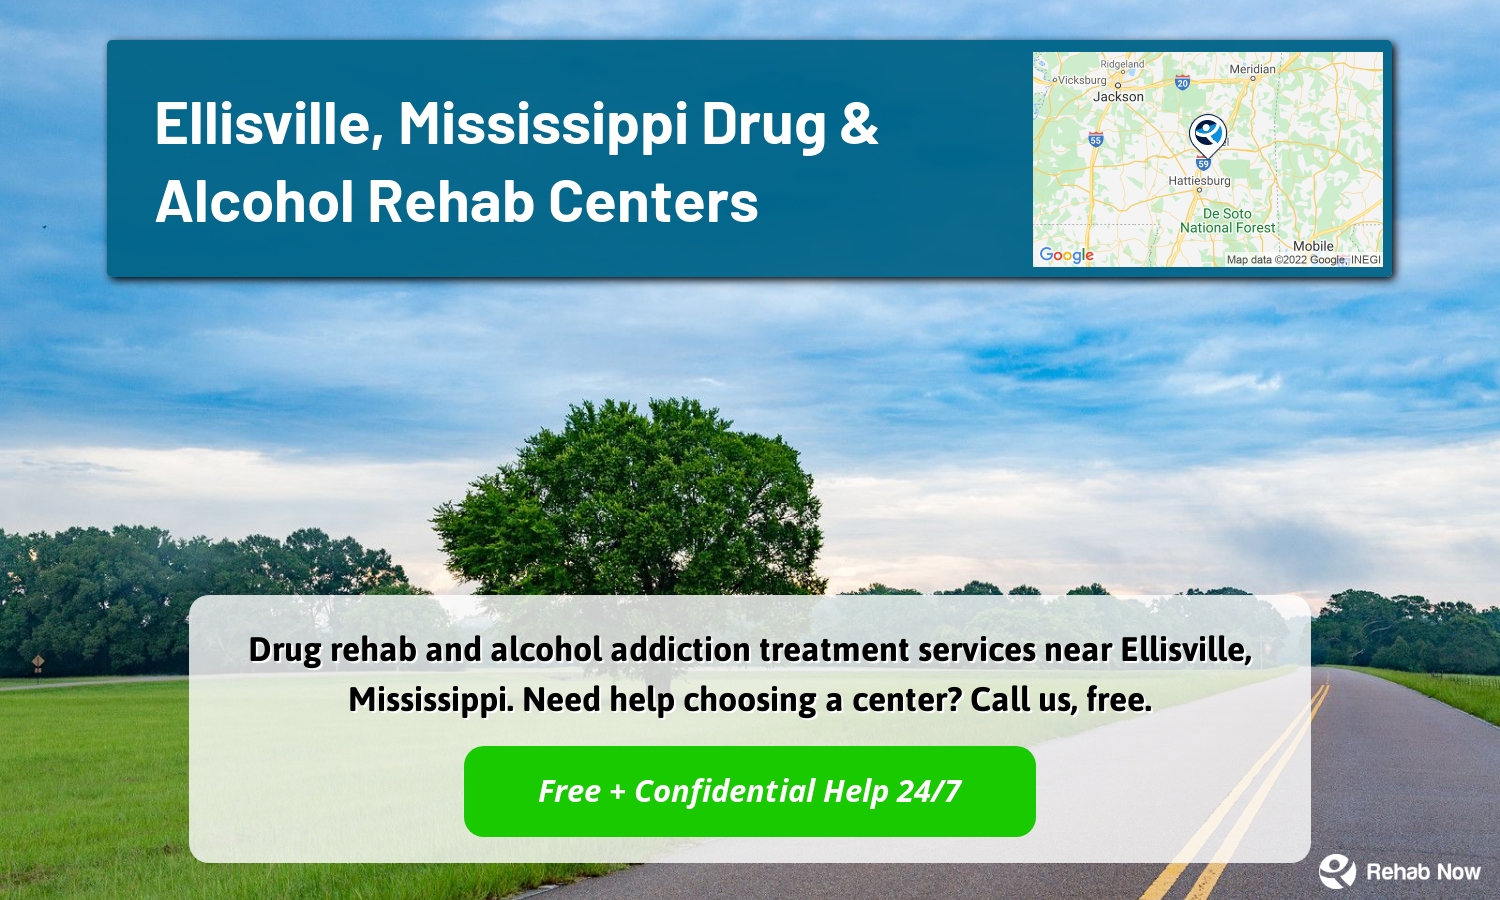 Drug rehab and alcohol addiction treatment services near Ellisville, Mississippi. Need help choosing a center? Call us, free.